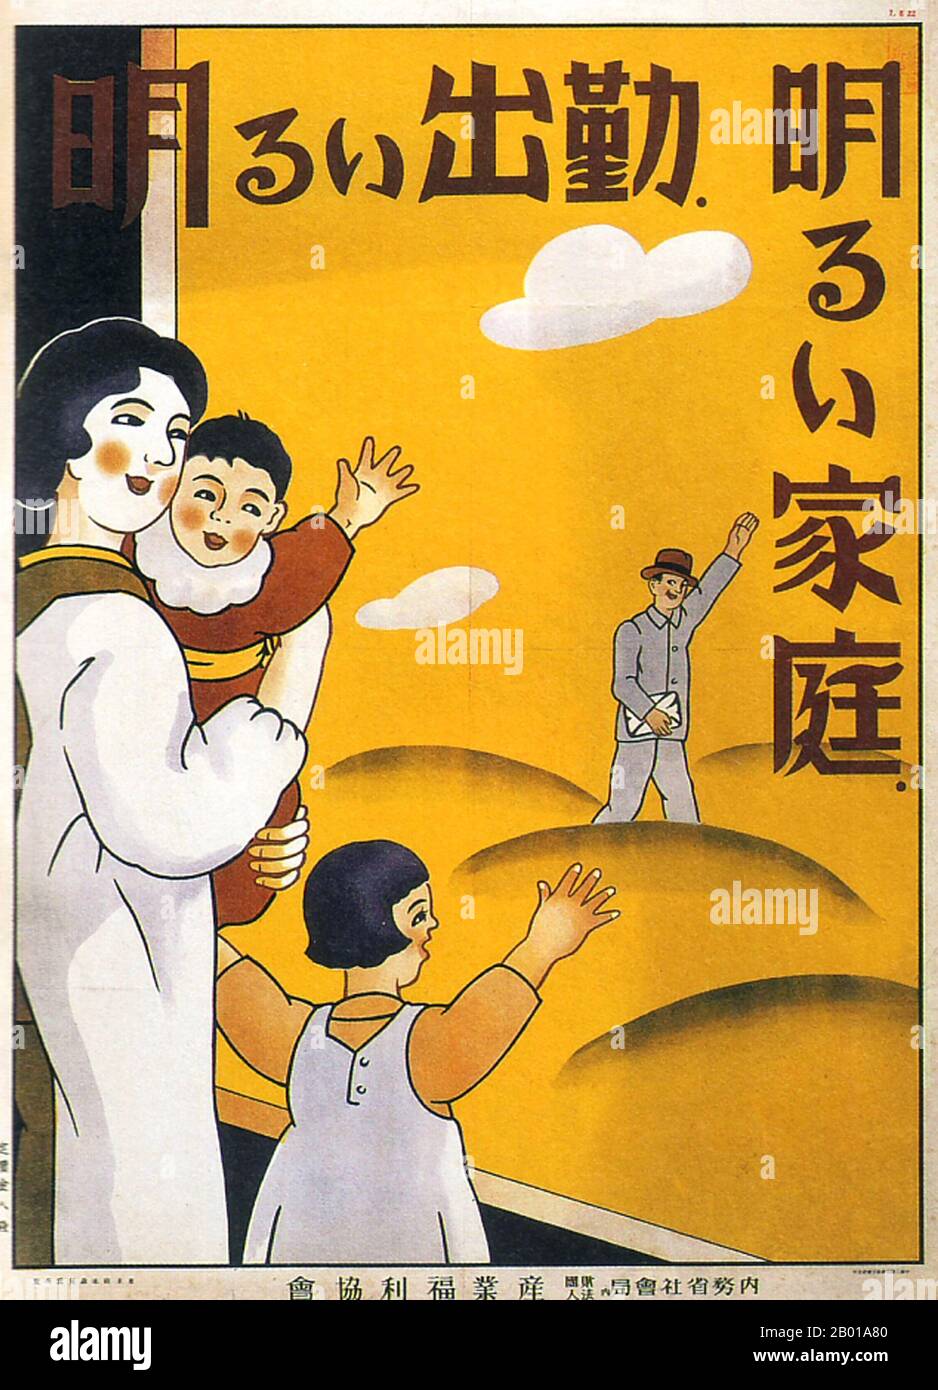 Japan: 'A Happy Worker Makes a Happy Home', Labour Welfare Association, 1932.  During late 1920s and 1930s Japan, a new poster style developed that reflected the growing influence of the masses in Japanese society. These art posters were strongly influenced by the emerging political forces of Communism and Fascism in Europe and the Soviet Union, adopting a style that incorporated bold slogans with artistic themes ranging from Leftist socialist realism through Stateism and state-directed public welfare, to Militarism and Imperialist expansionism. Stock Photo